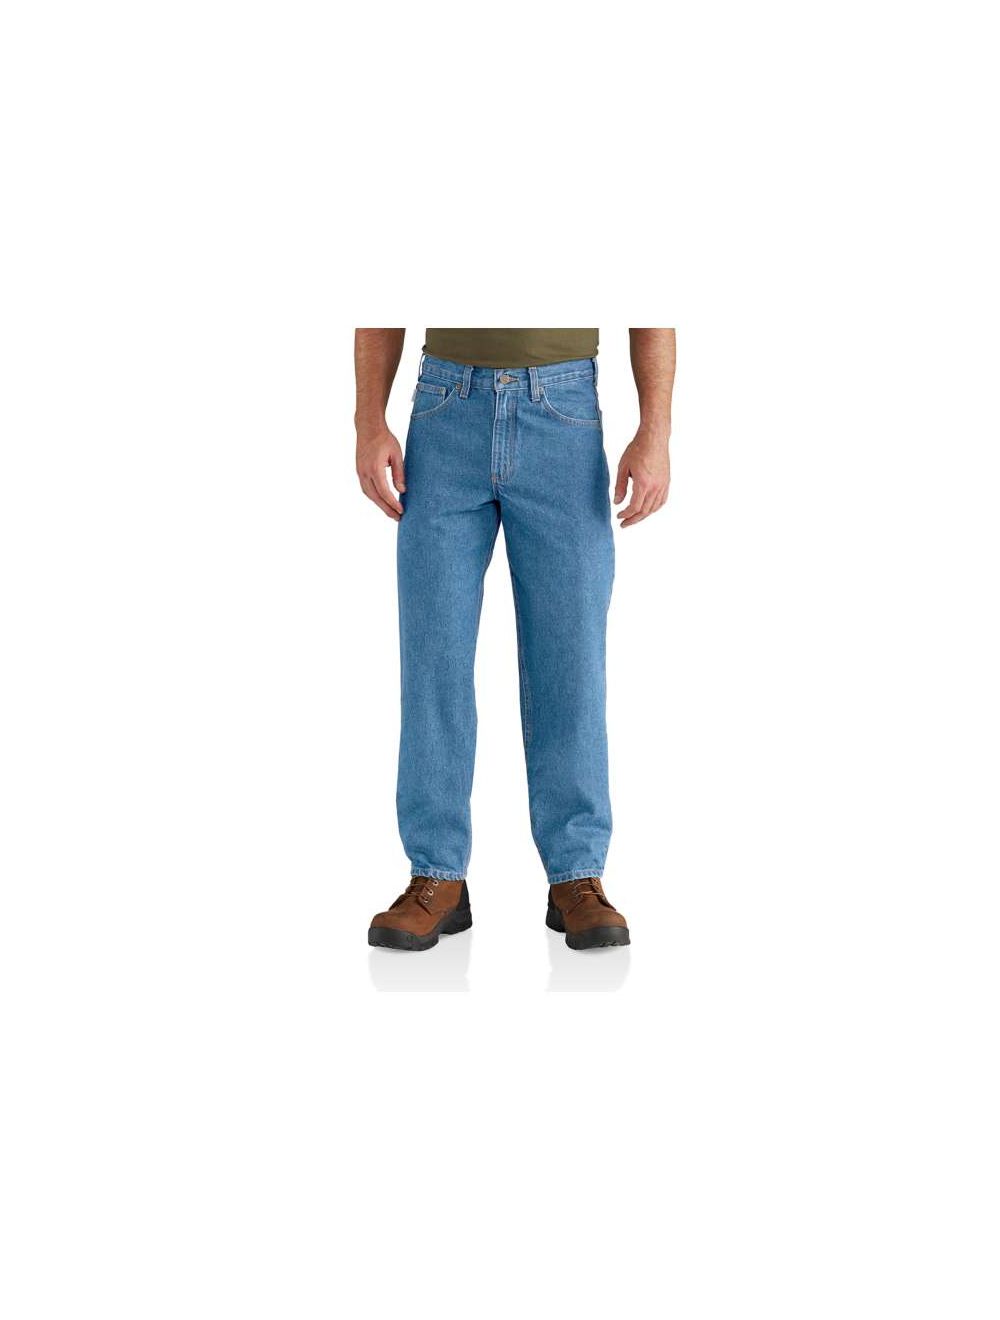 Carhartt Men's Relaxed-Fit Tapered-Leg Jean